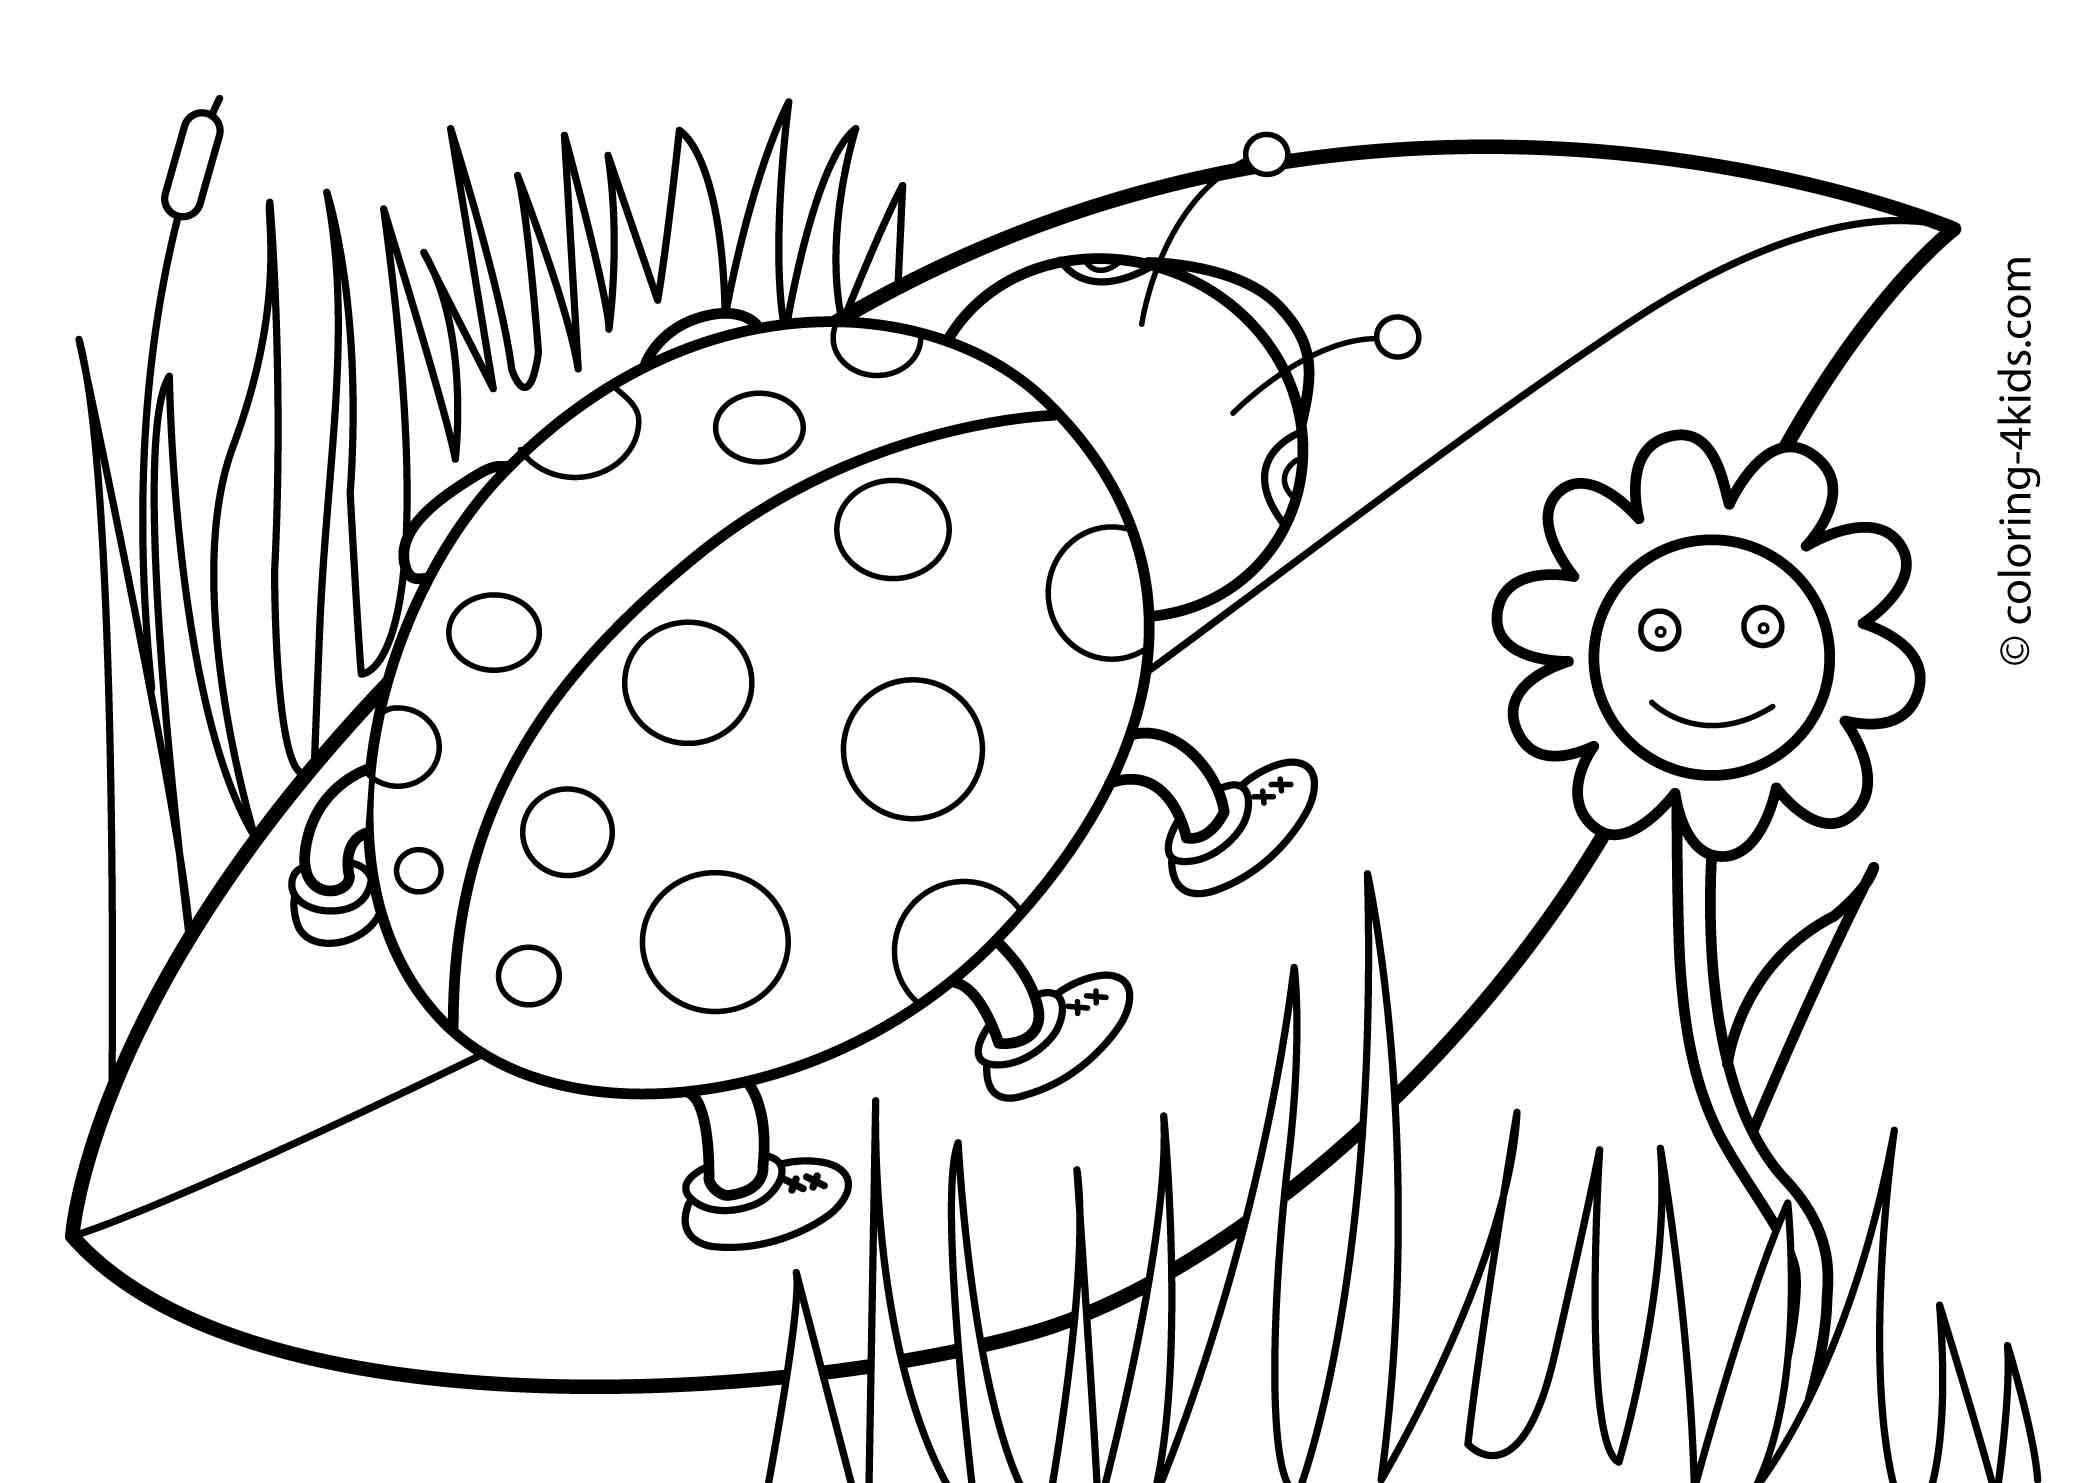 Spring coloring pages for kids, free printable | coloing-4kids.com